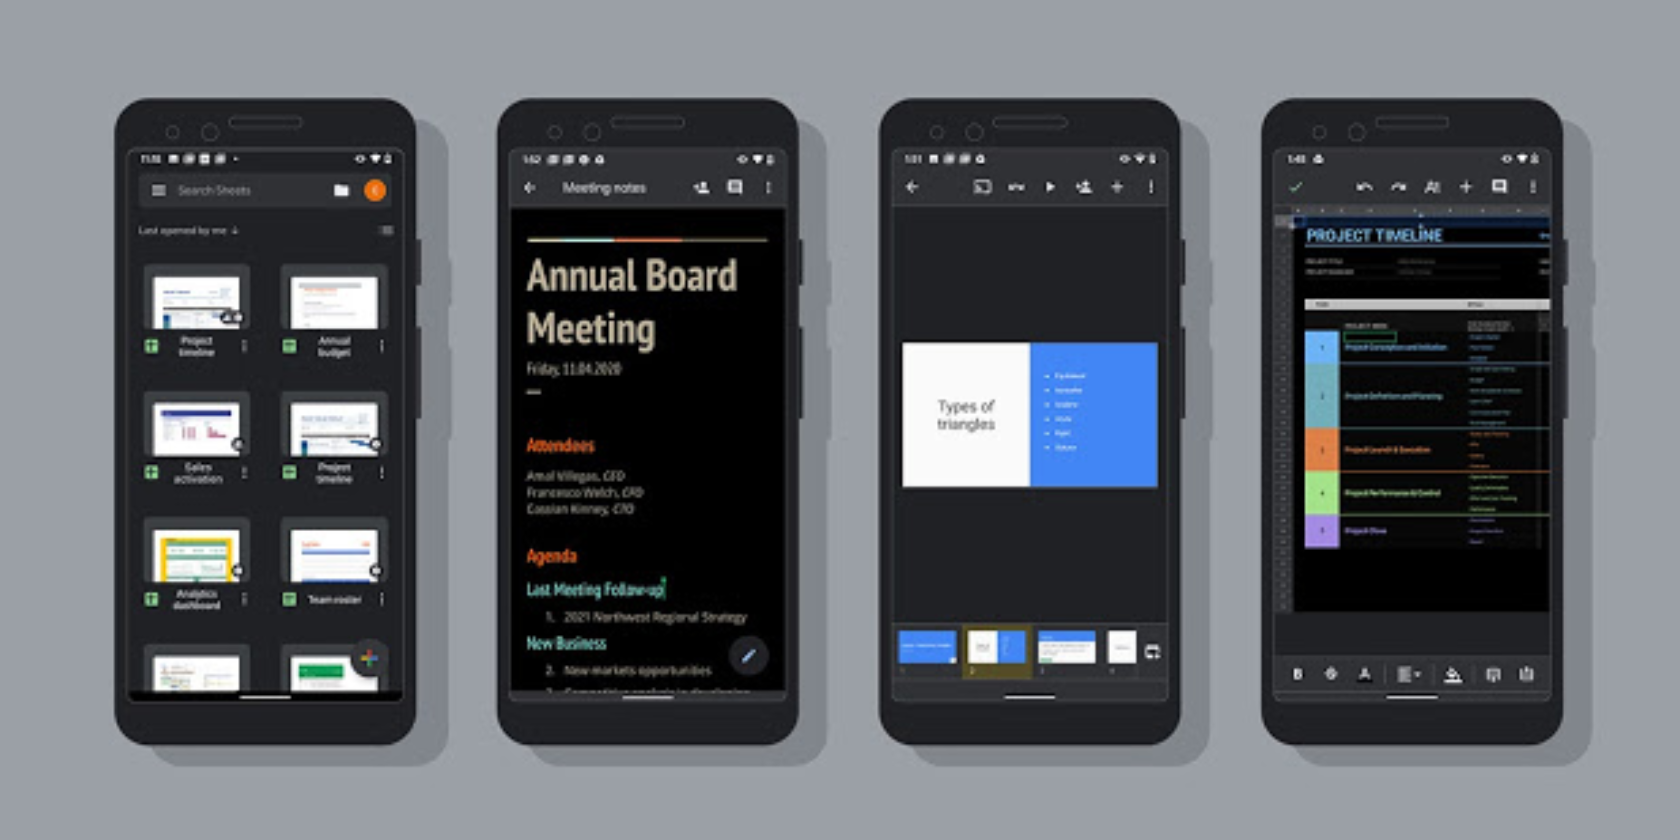 Google Docs, Sheets, and Slides Now Support Dark Mode